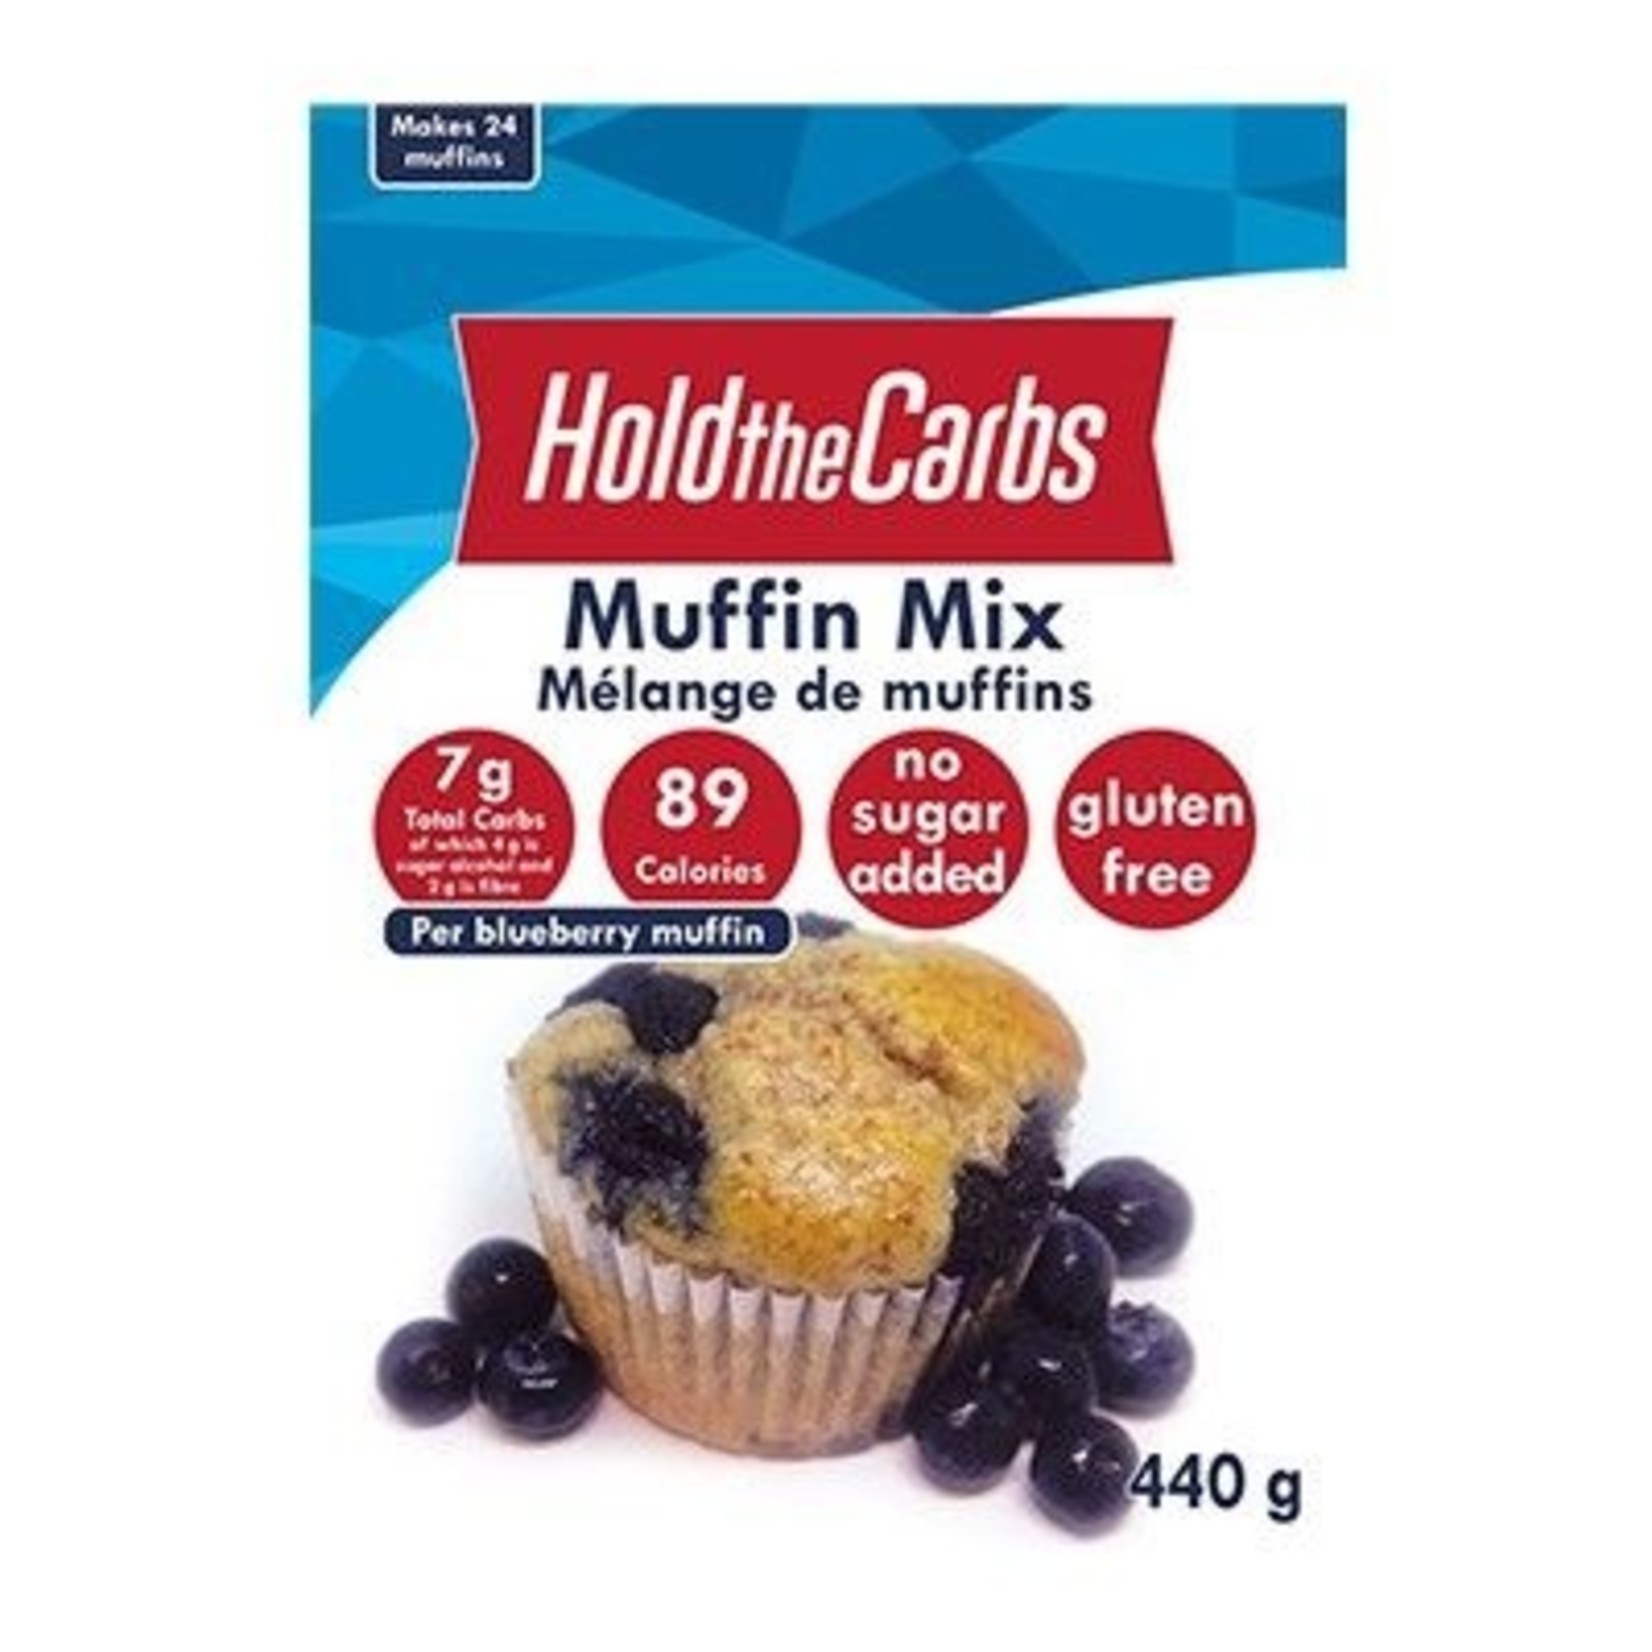 Hold the Carbs Hold The Carbs -  Muffin Mix